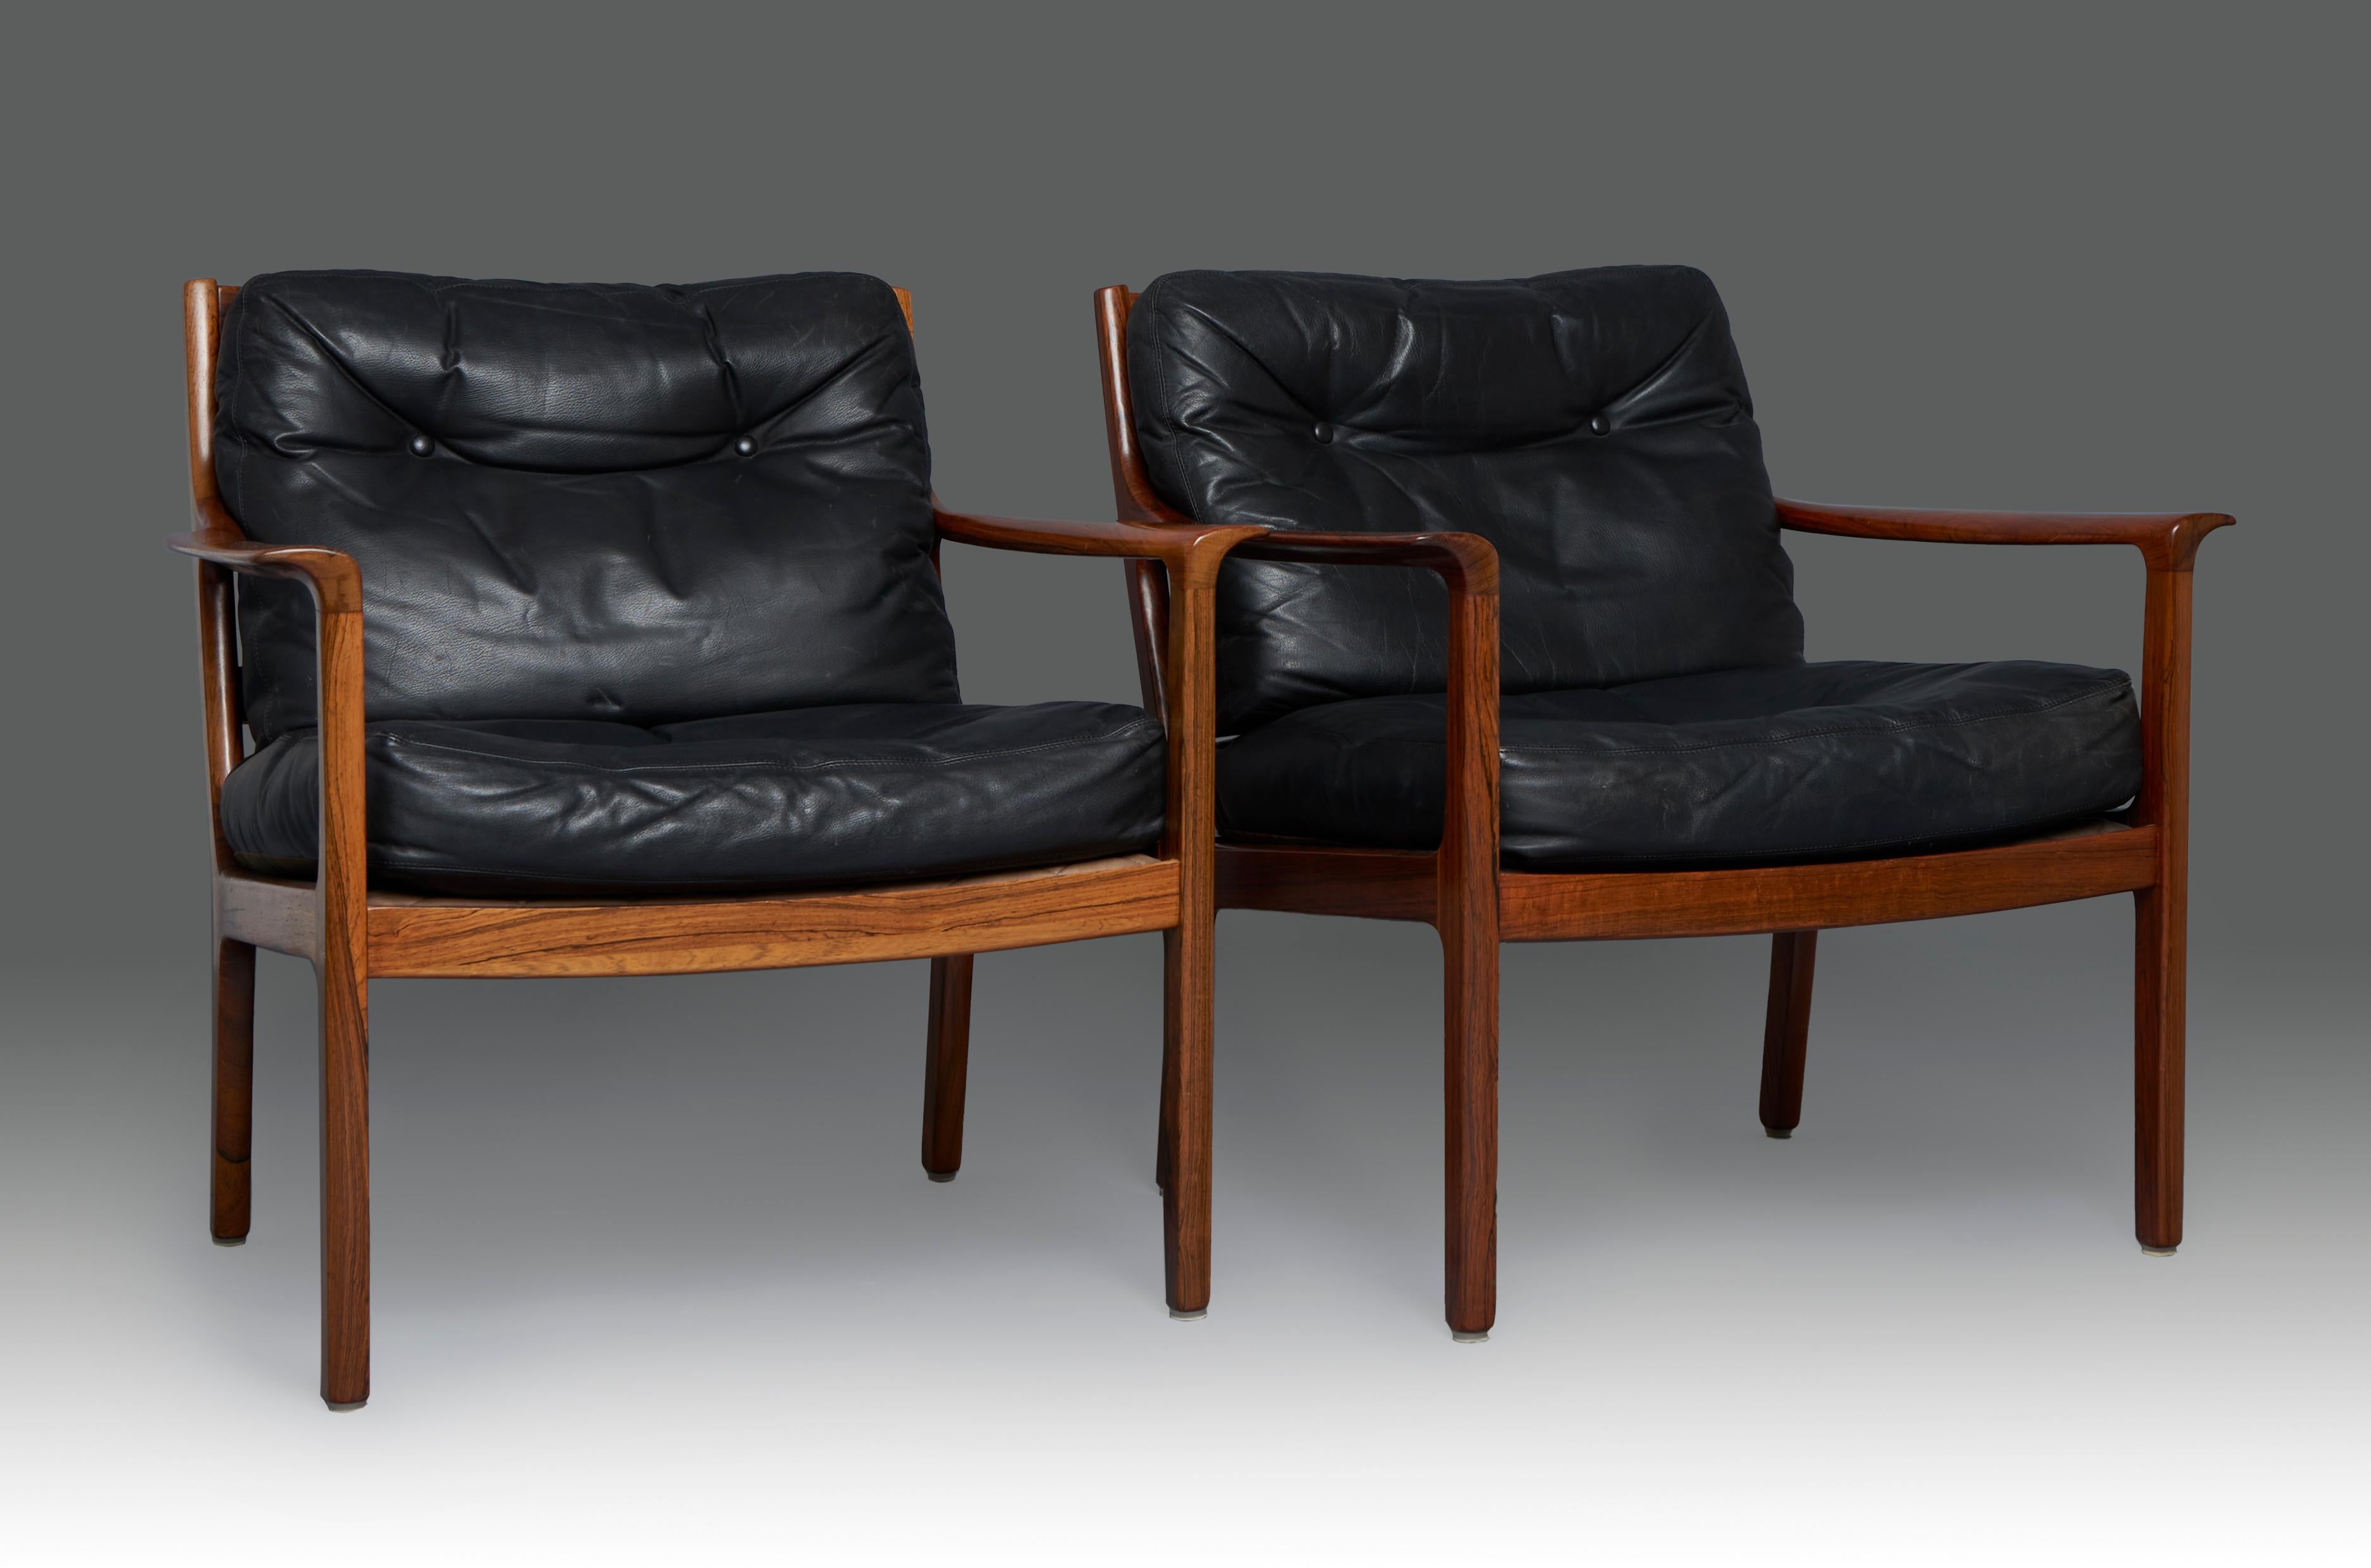 Pair of easy chairs in leather and rosewood designed by Ole Wanscher for P. Jeppesen. Denmark, 1960’s. magnificent restored state, original leather.